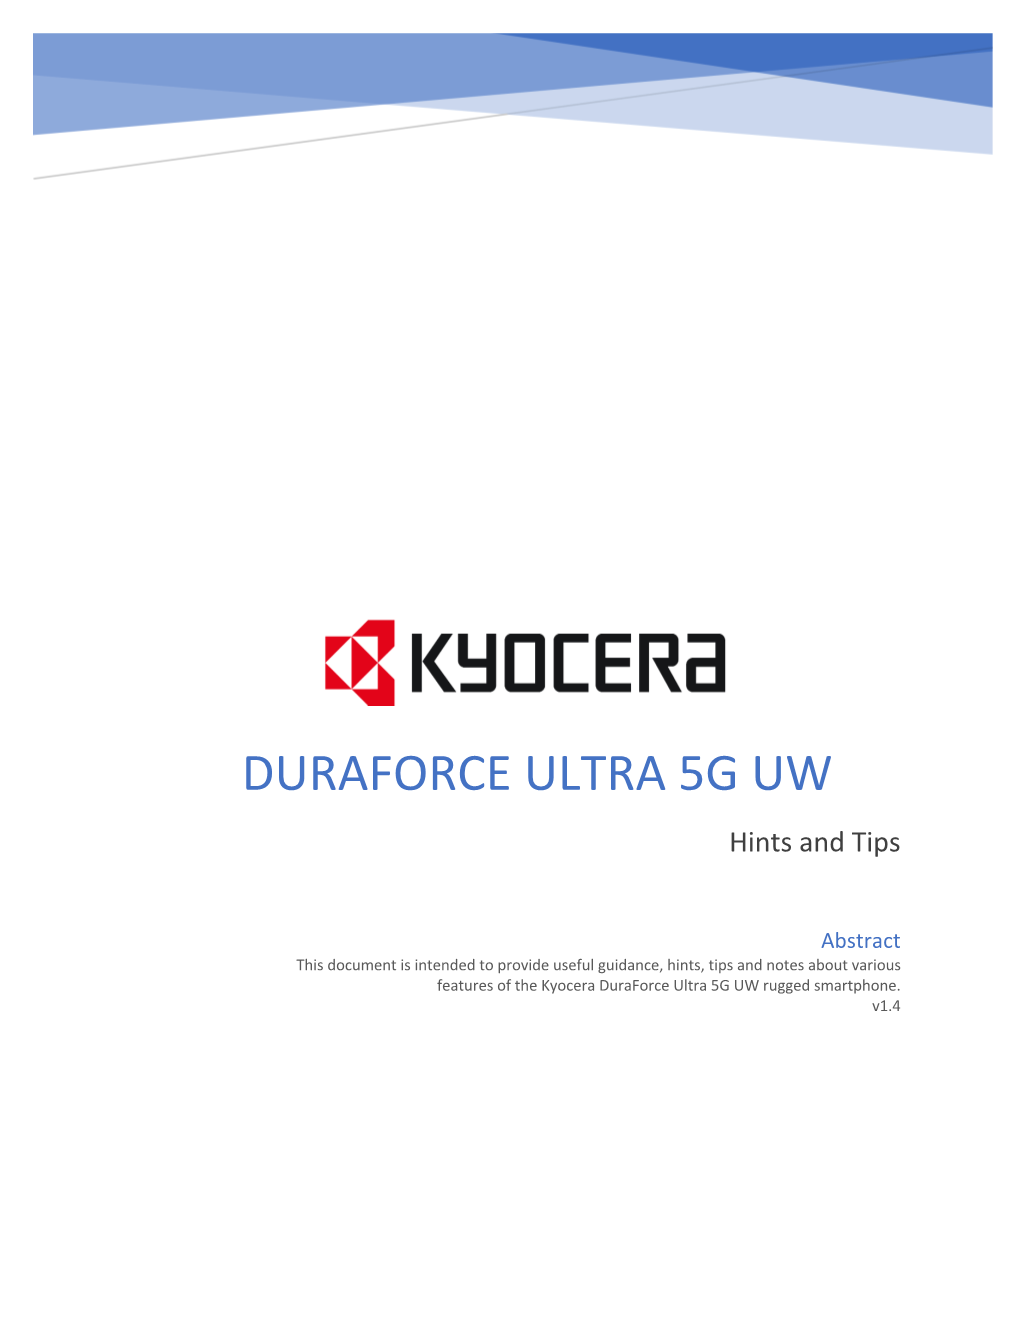 DURAFORCE ULTRA 5G UW Hints and Tips